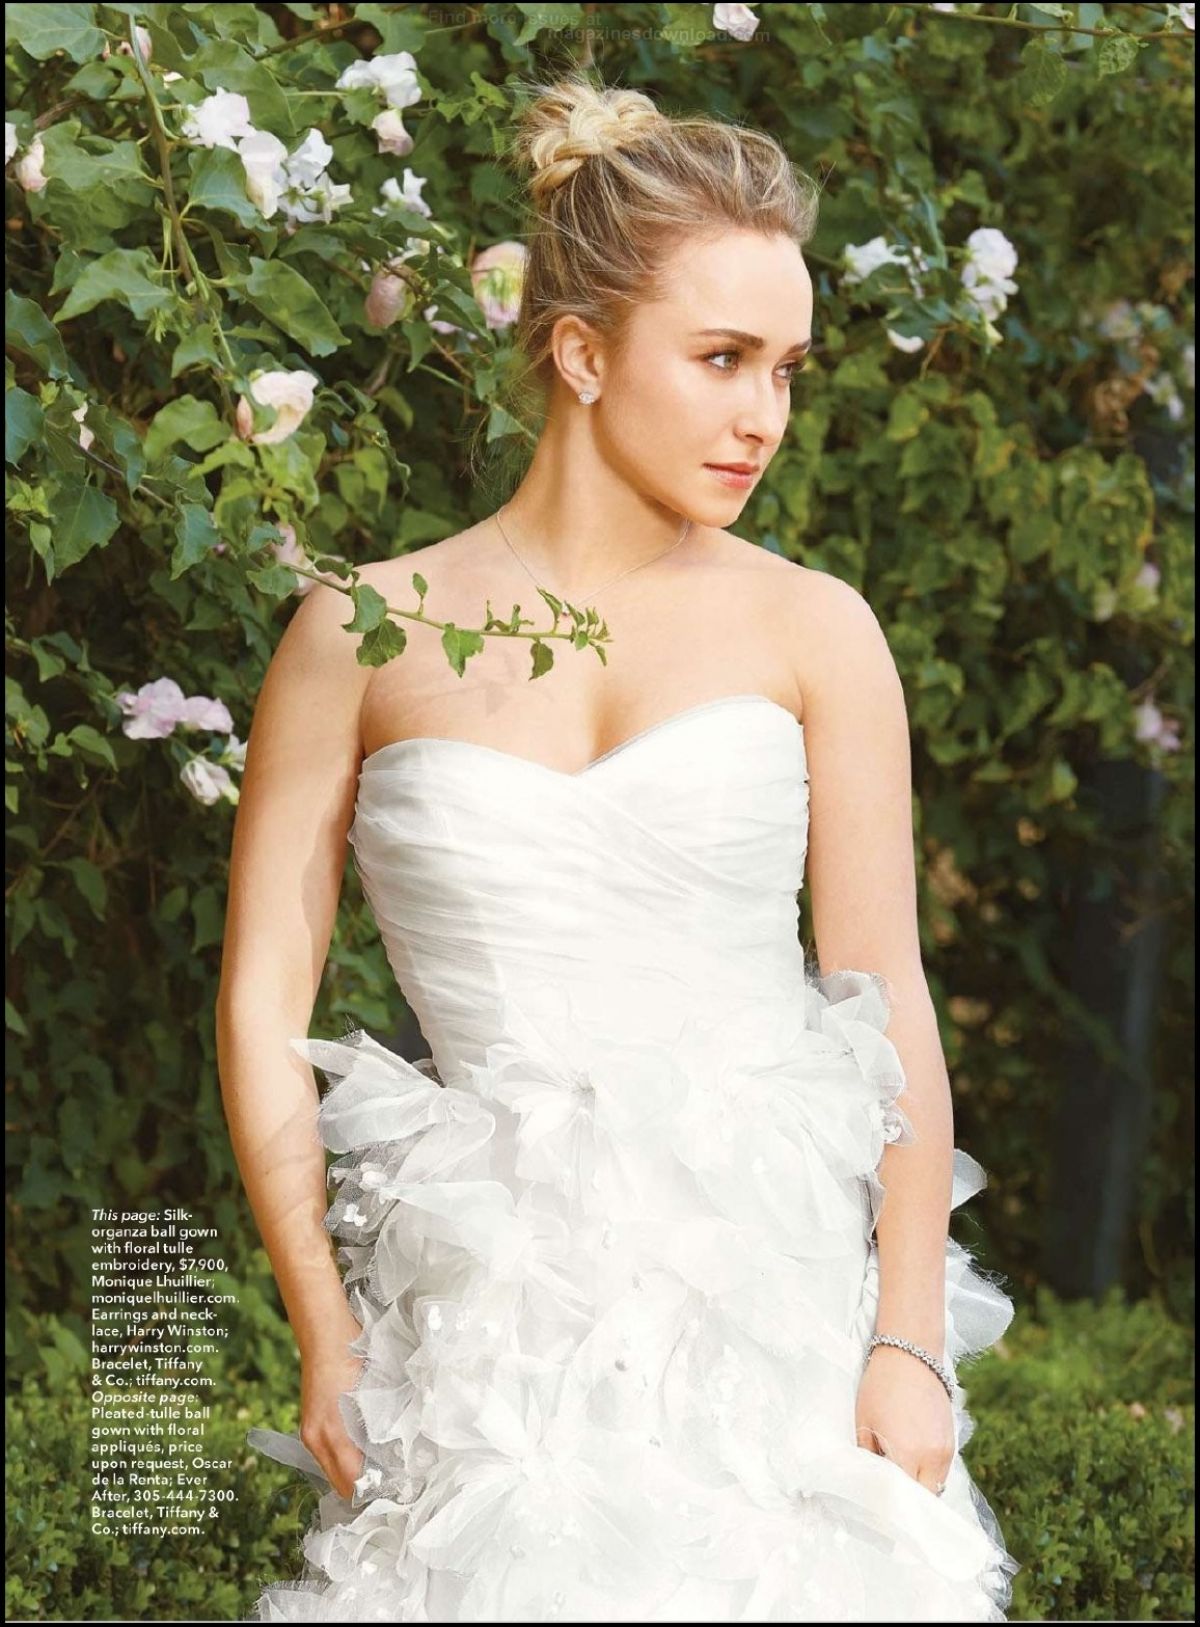 The April Issue Of Brides 5